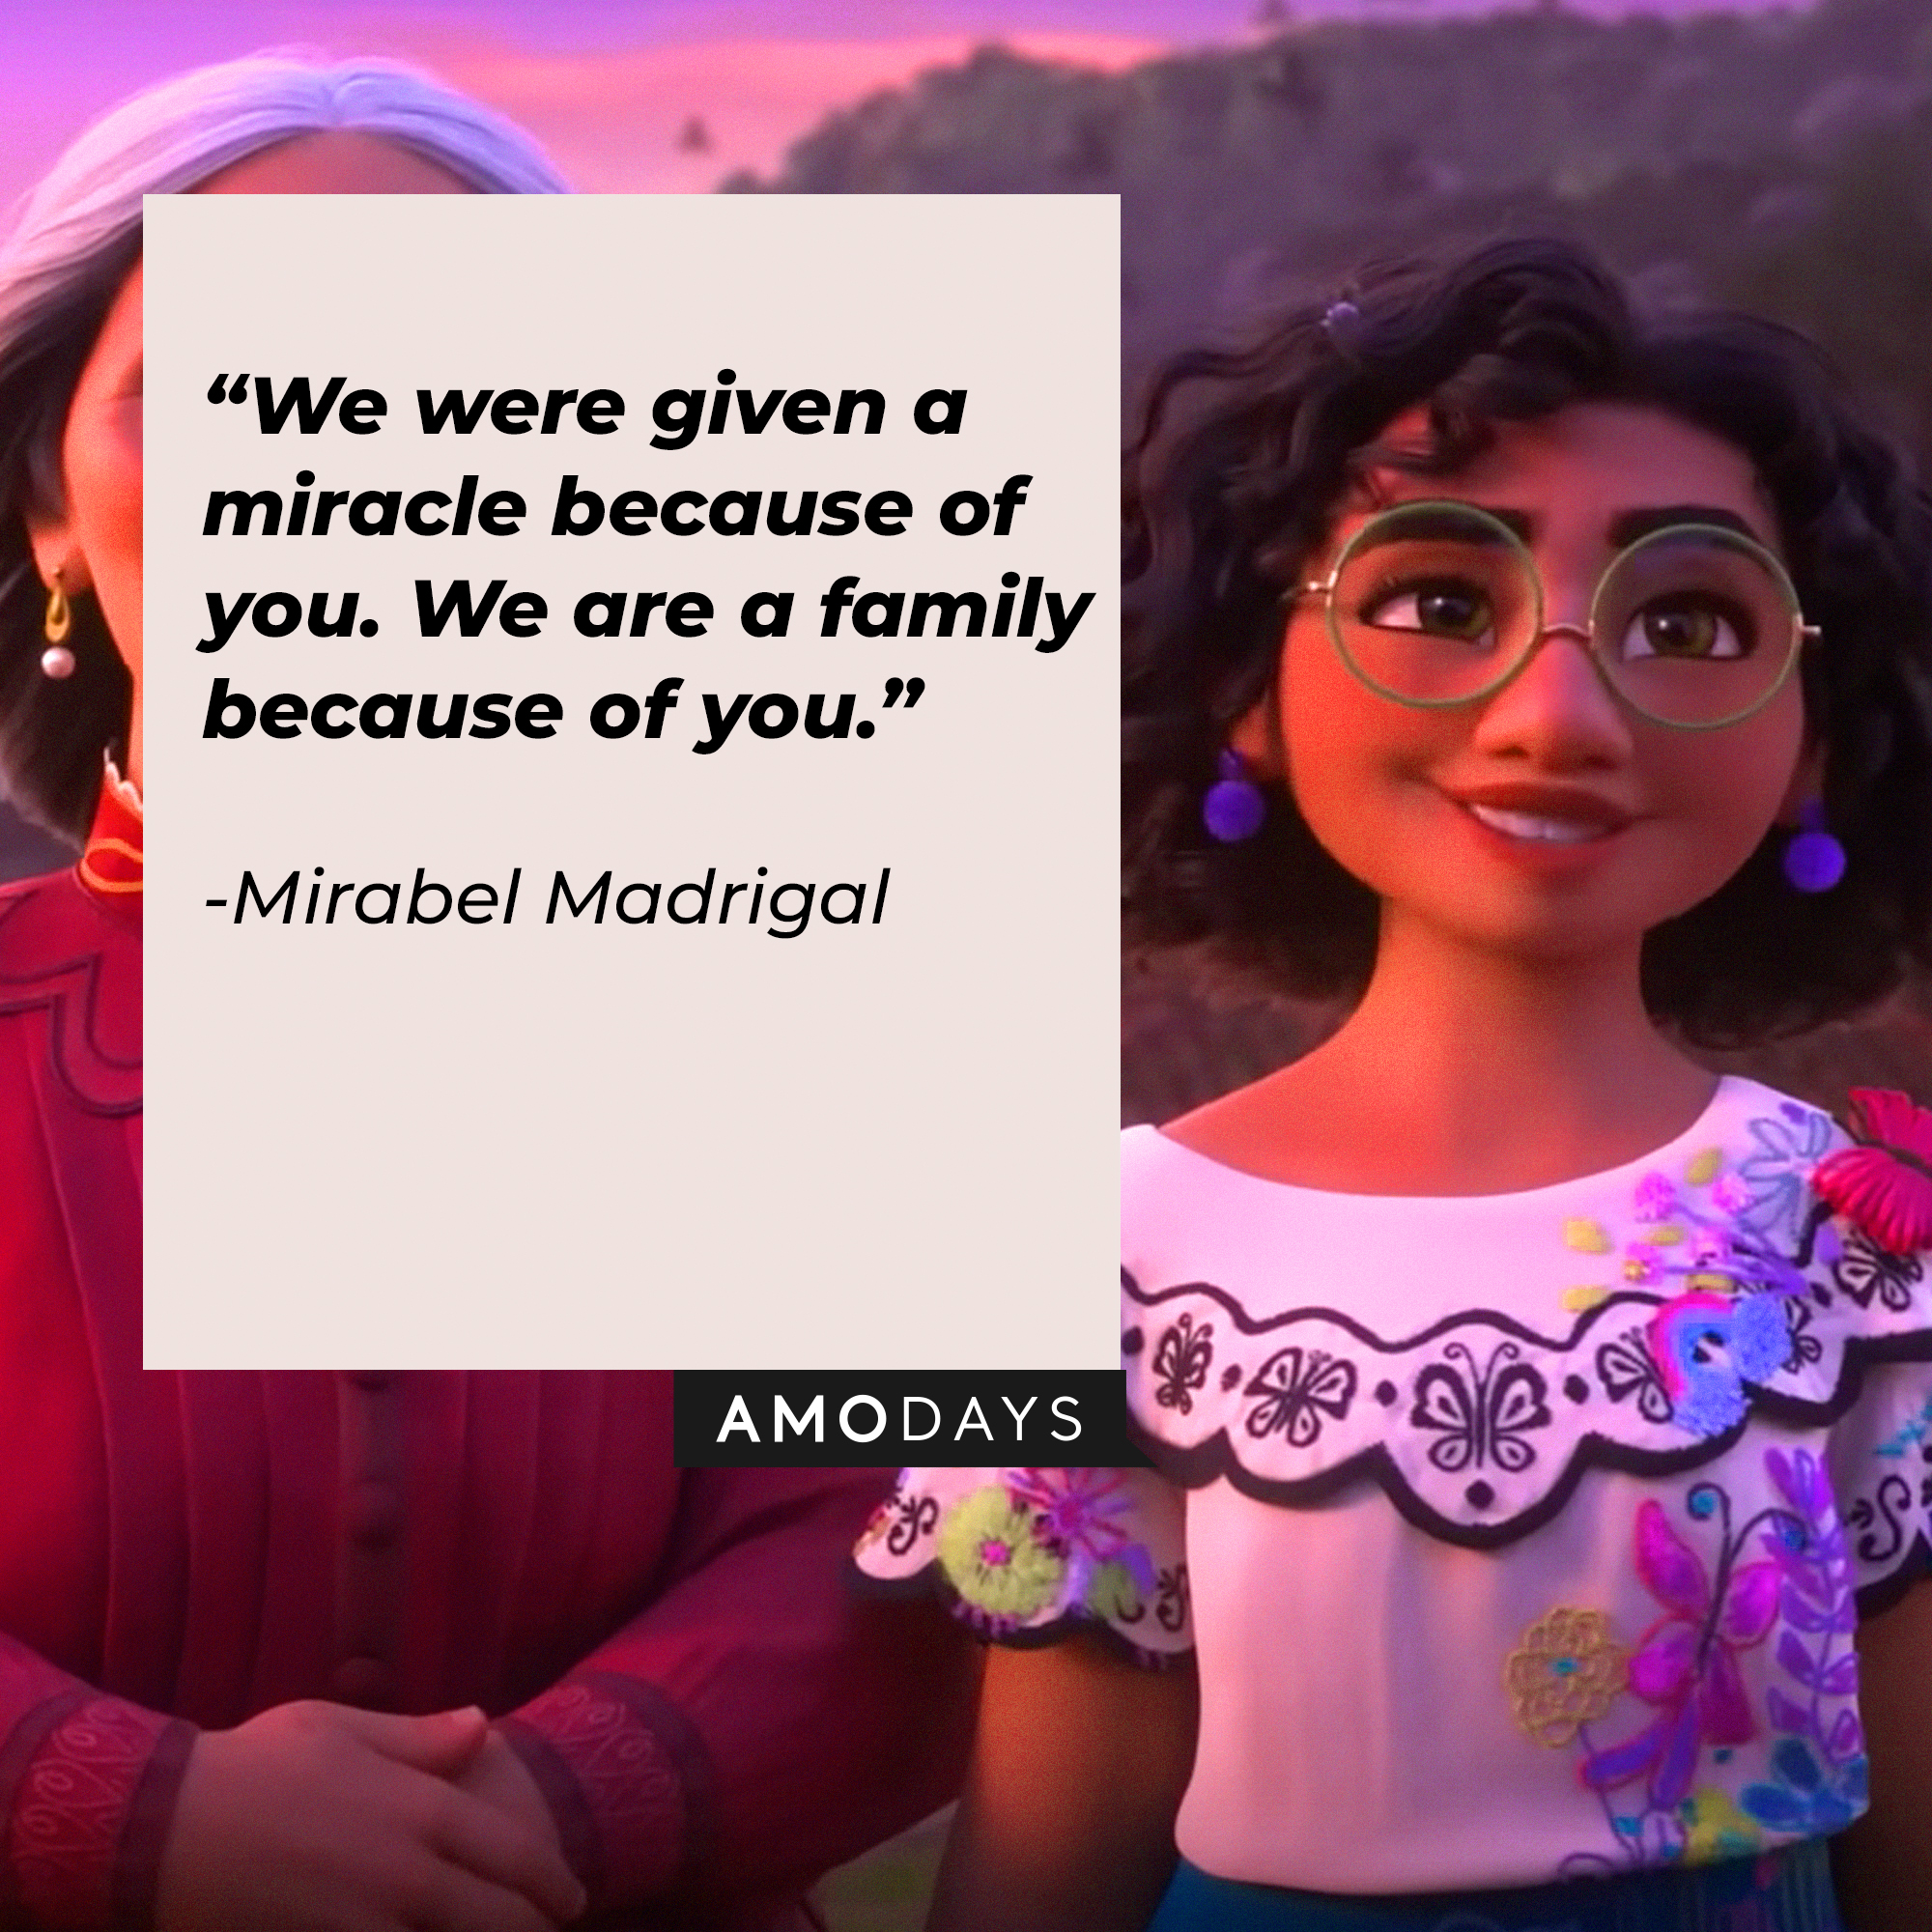 An image of Mirabel, with her quote: “We were given a miracle because of you. We are a family because of you.” | Source: Youtube.com/DisneyMusicVEVO